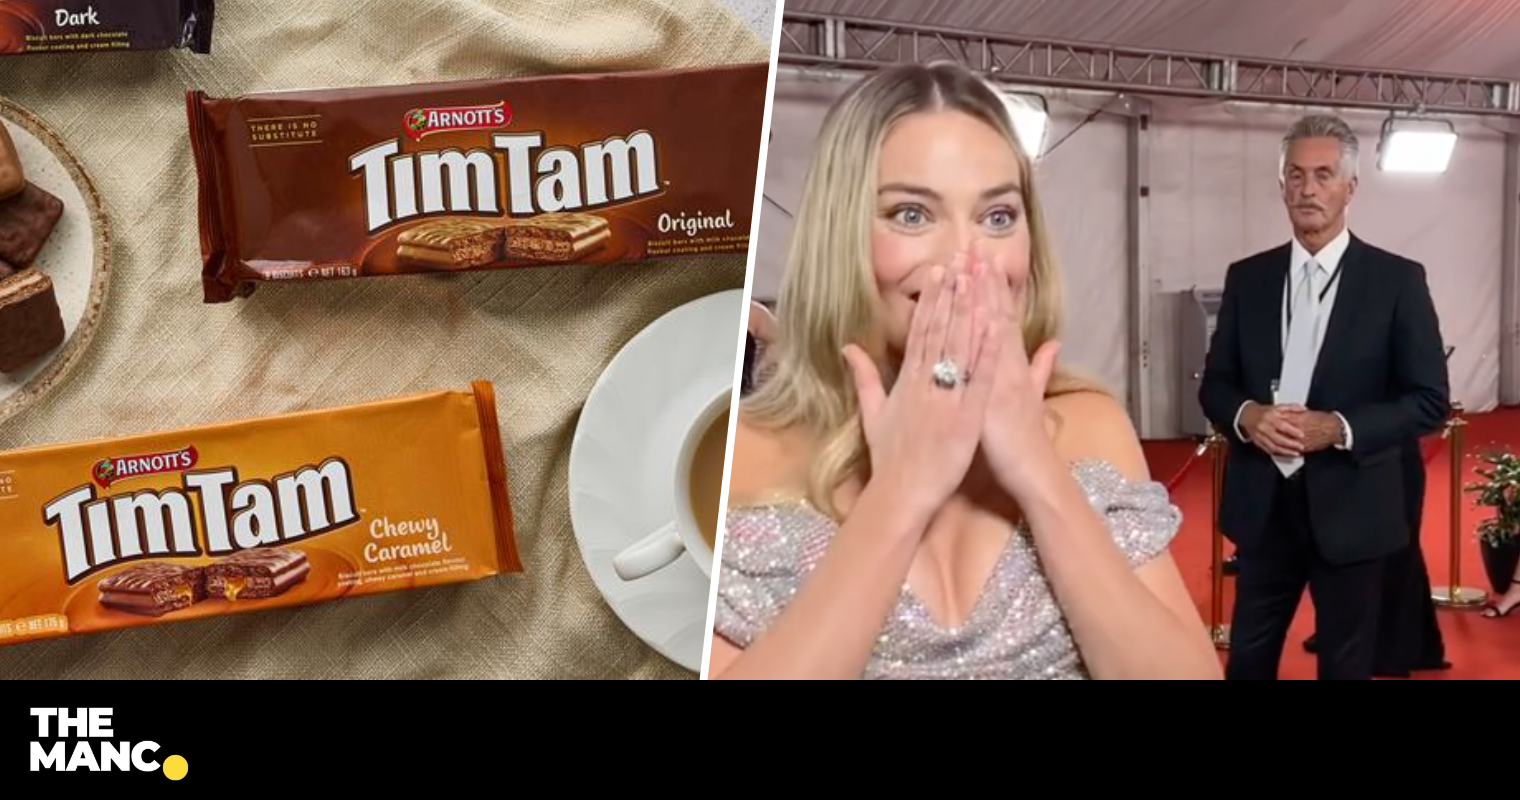 Tim Tam has finally launched in the UK